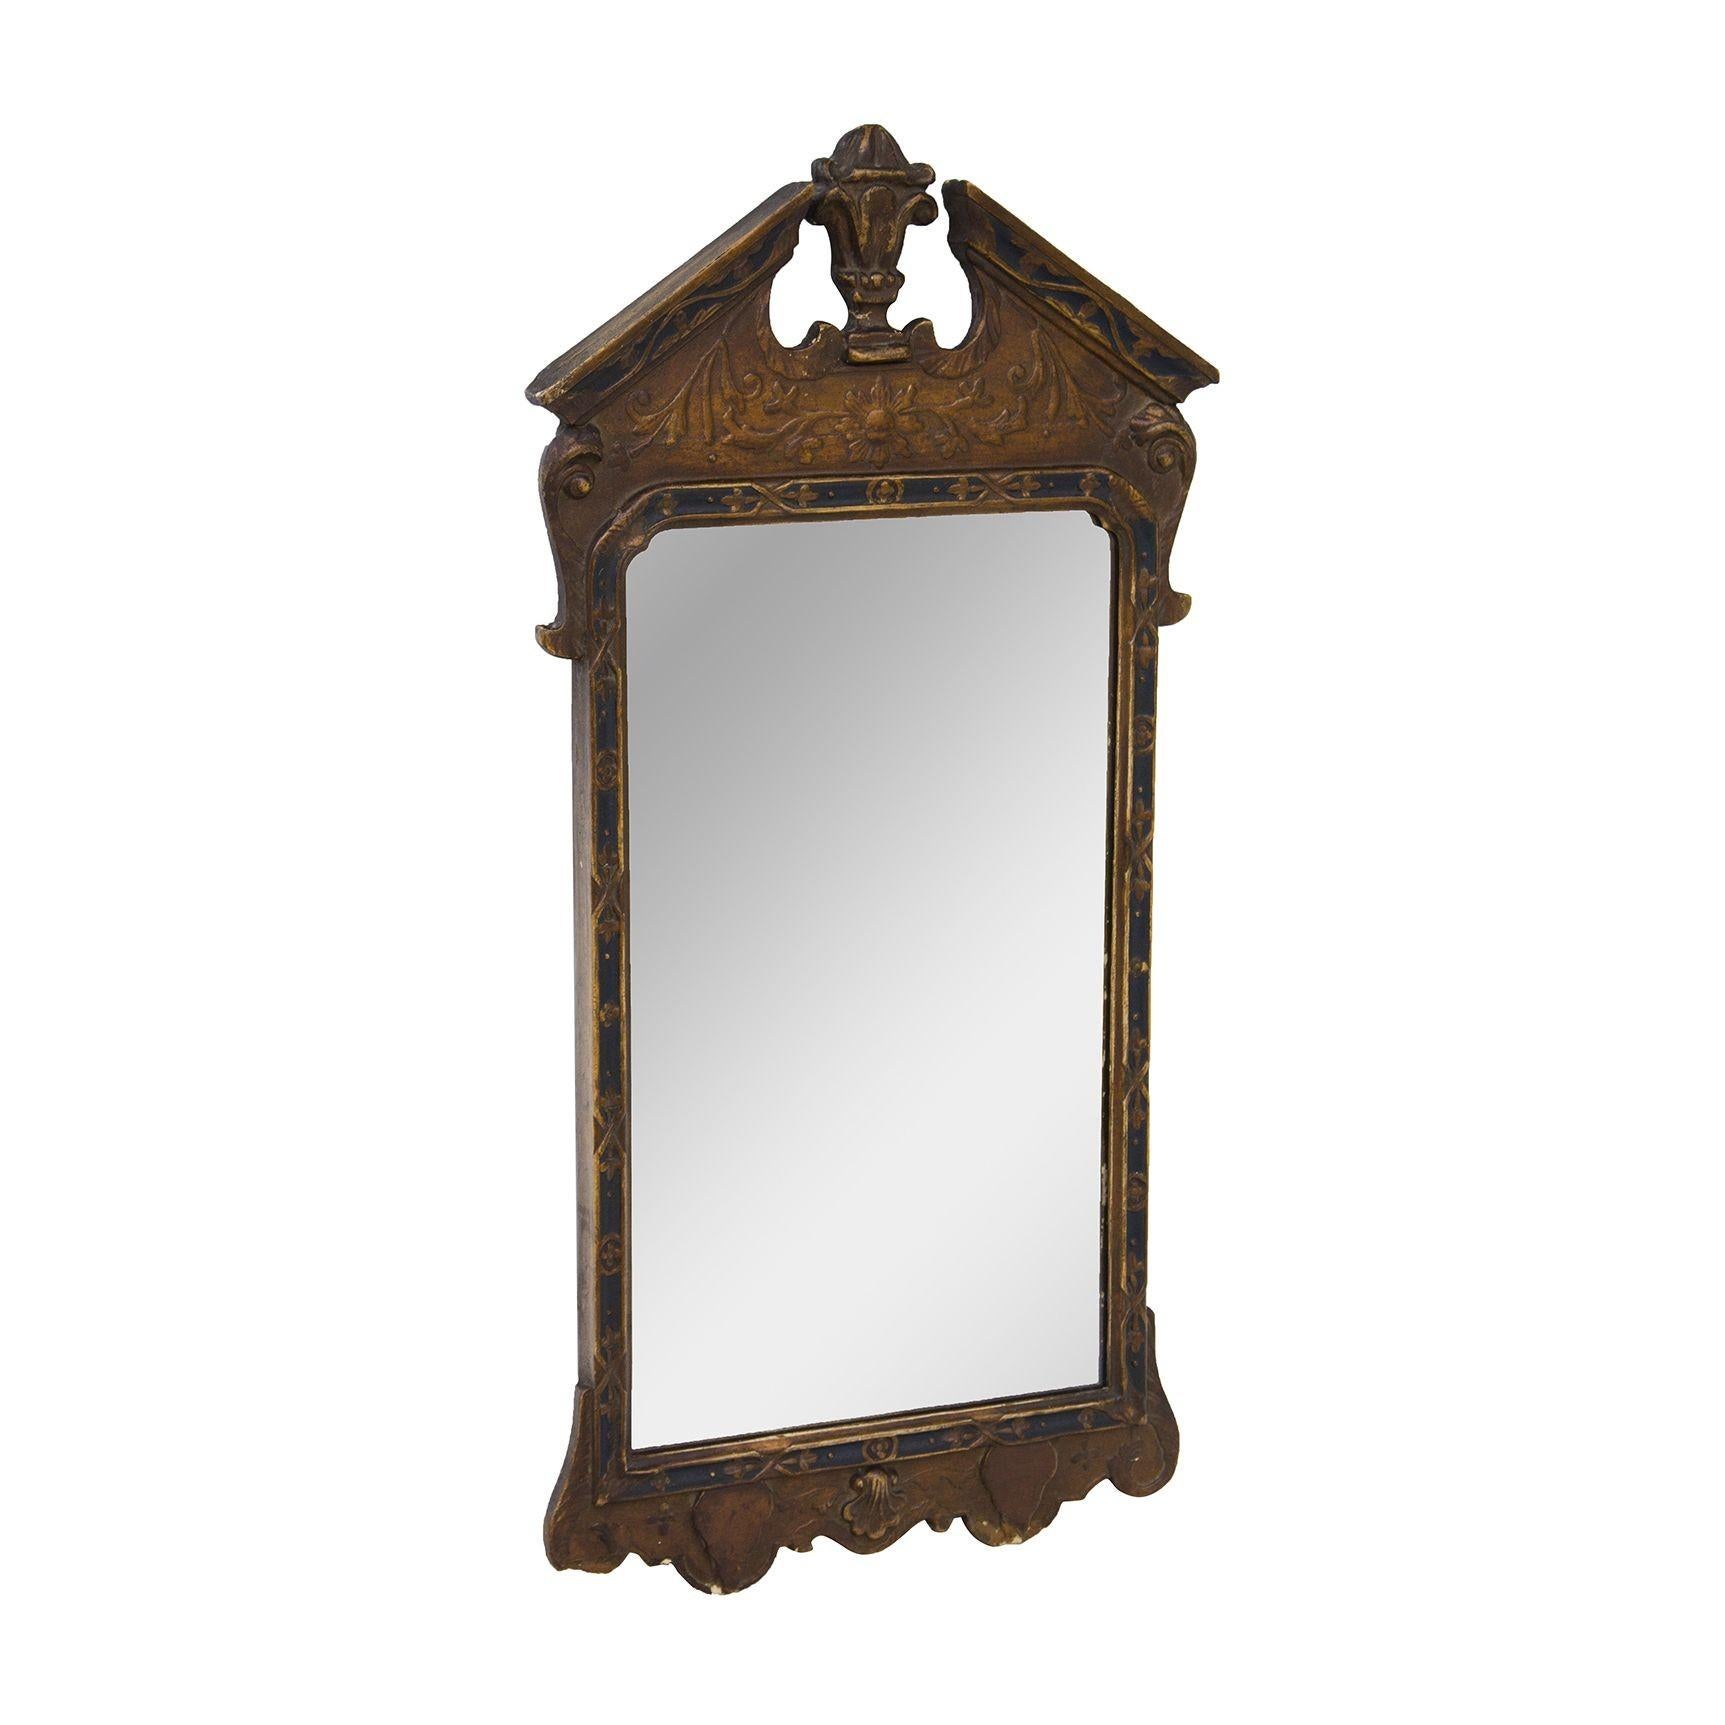 Antique plaster mirror with wooden framing. No maker's marks. 
Condition notes: Some chips in places and pleasing, age-appropriate wear / patina. 
Dimensions: 18